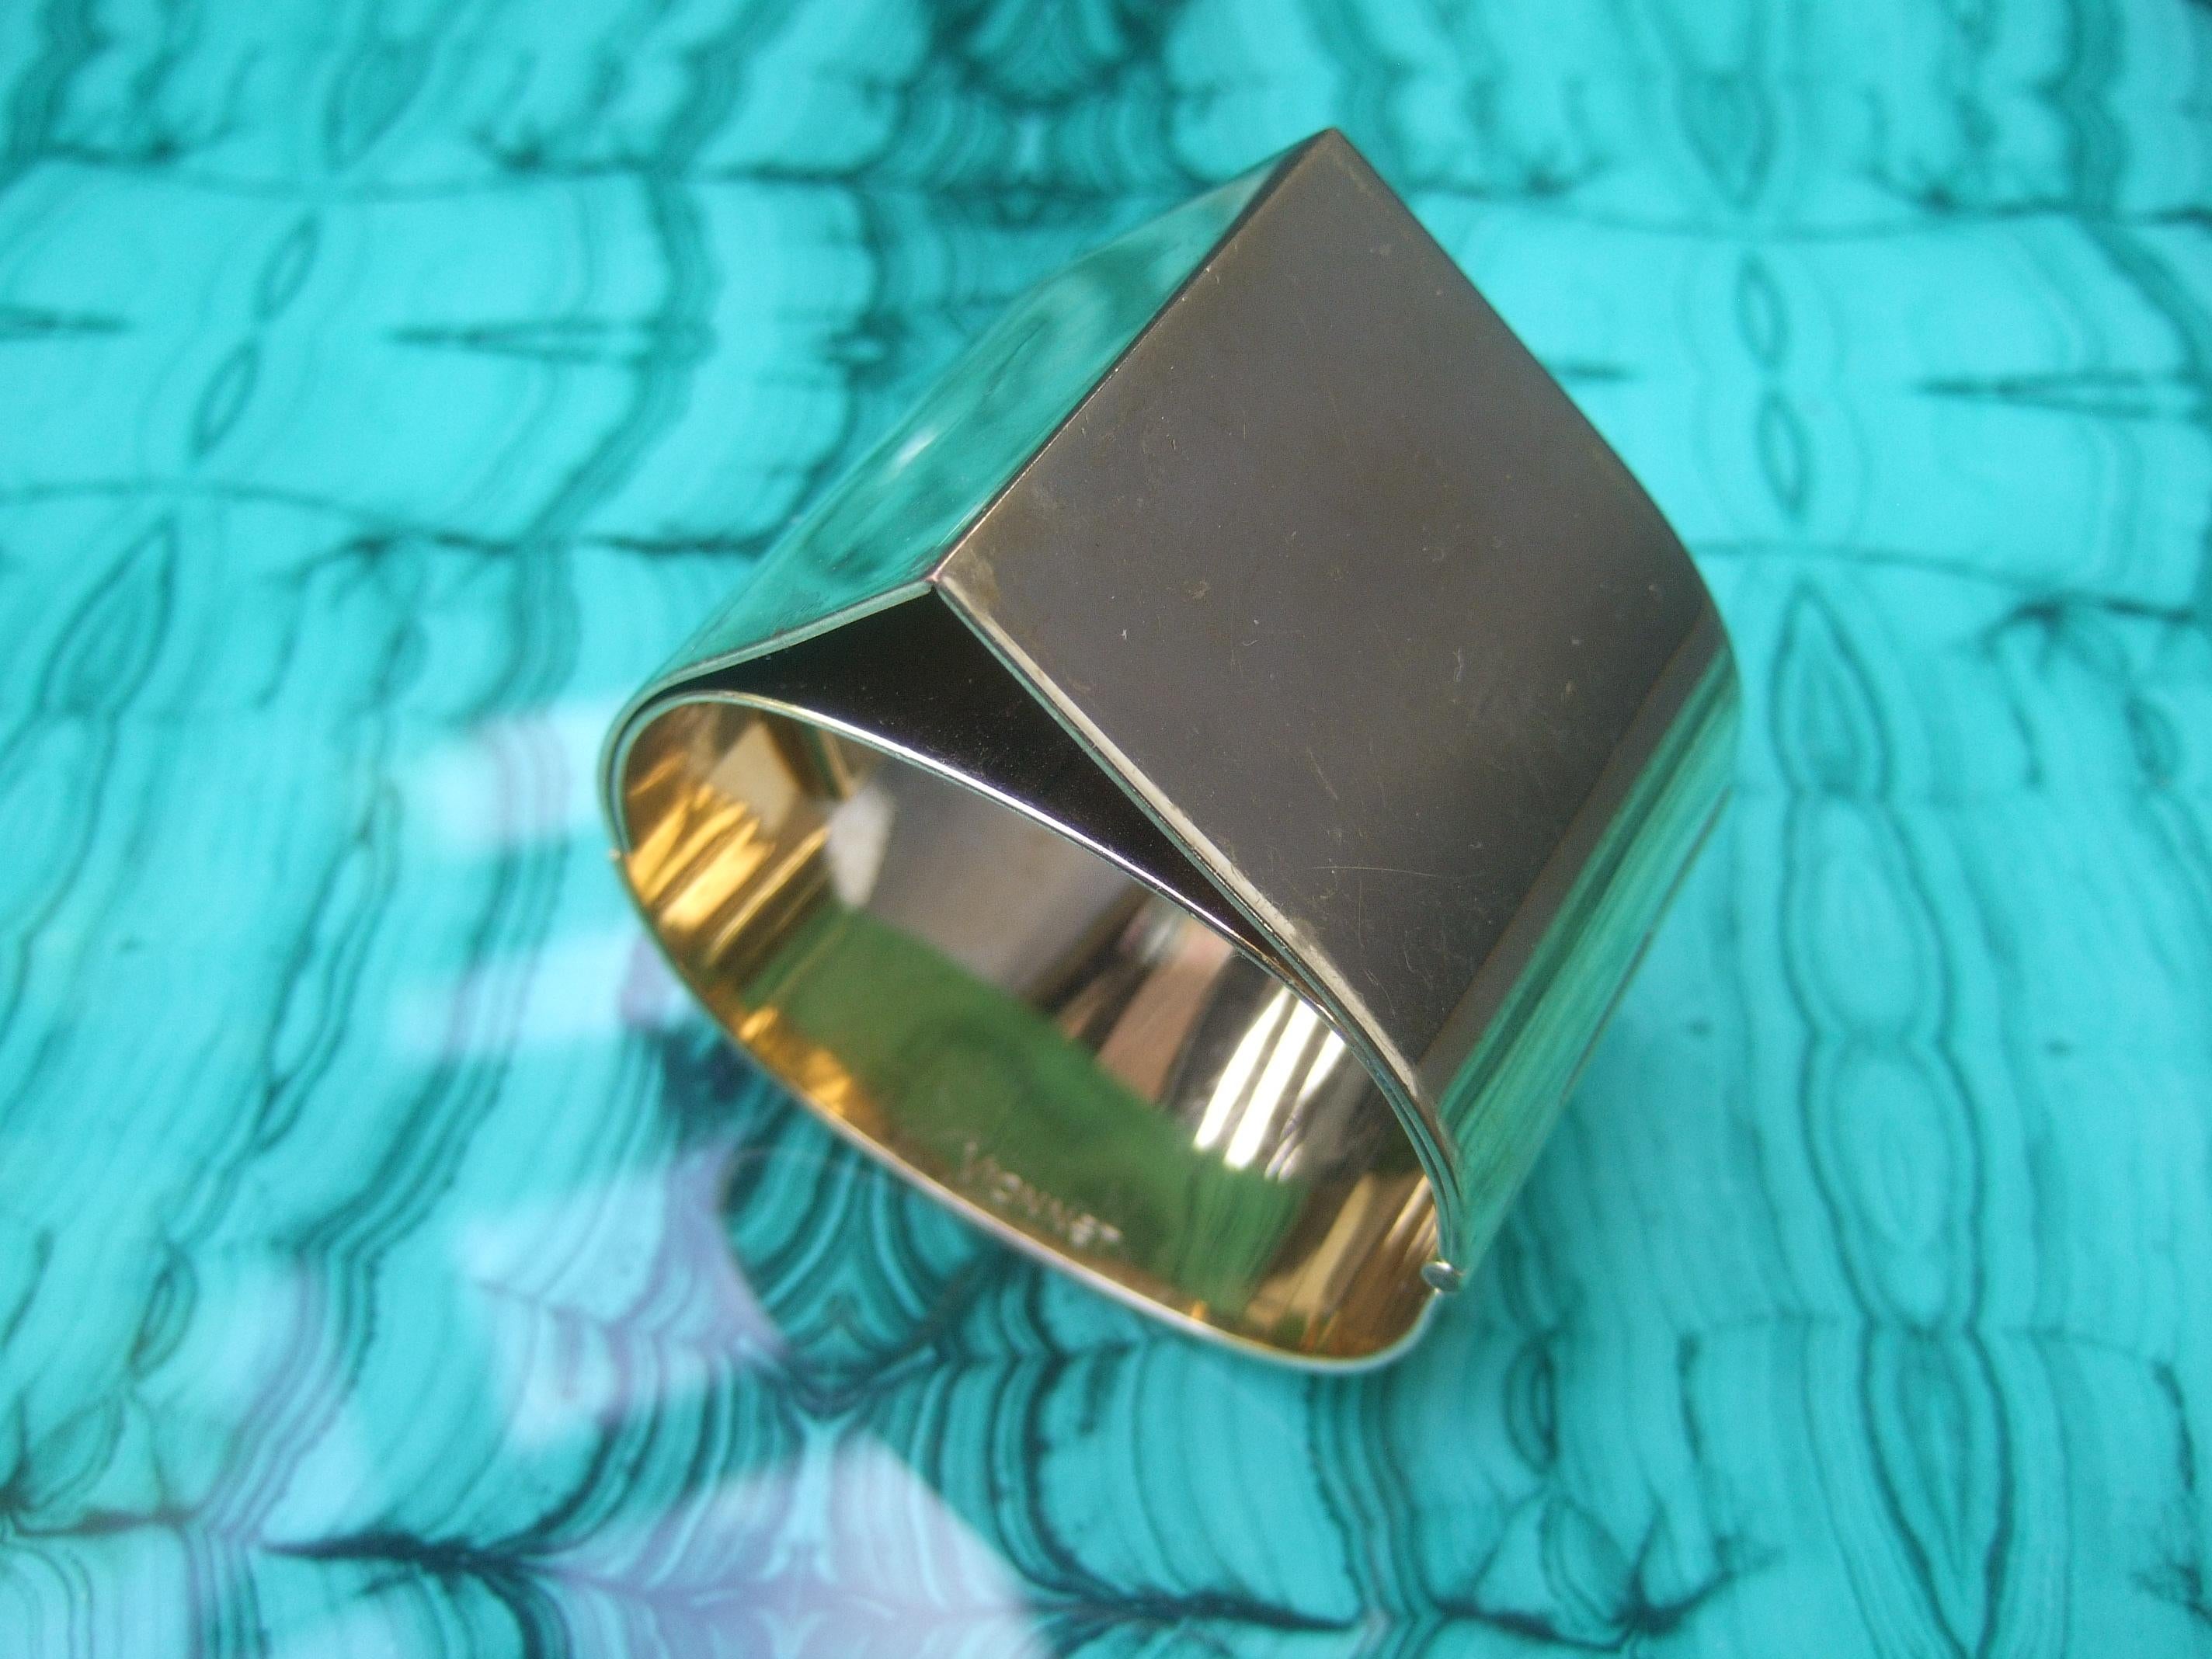 Vionnet Sleek Wide Gilt Metal Hinged Cuff Bracelet c 1990s In Good Condition For Sale In University City, MO